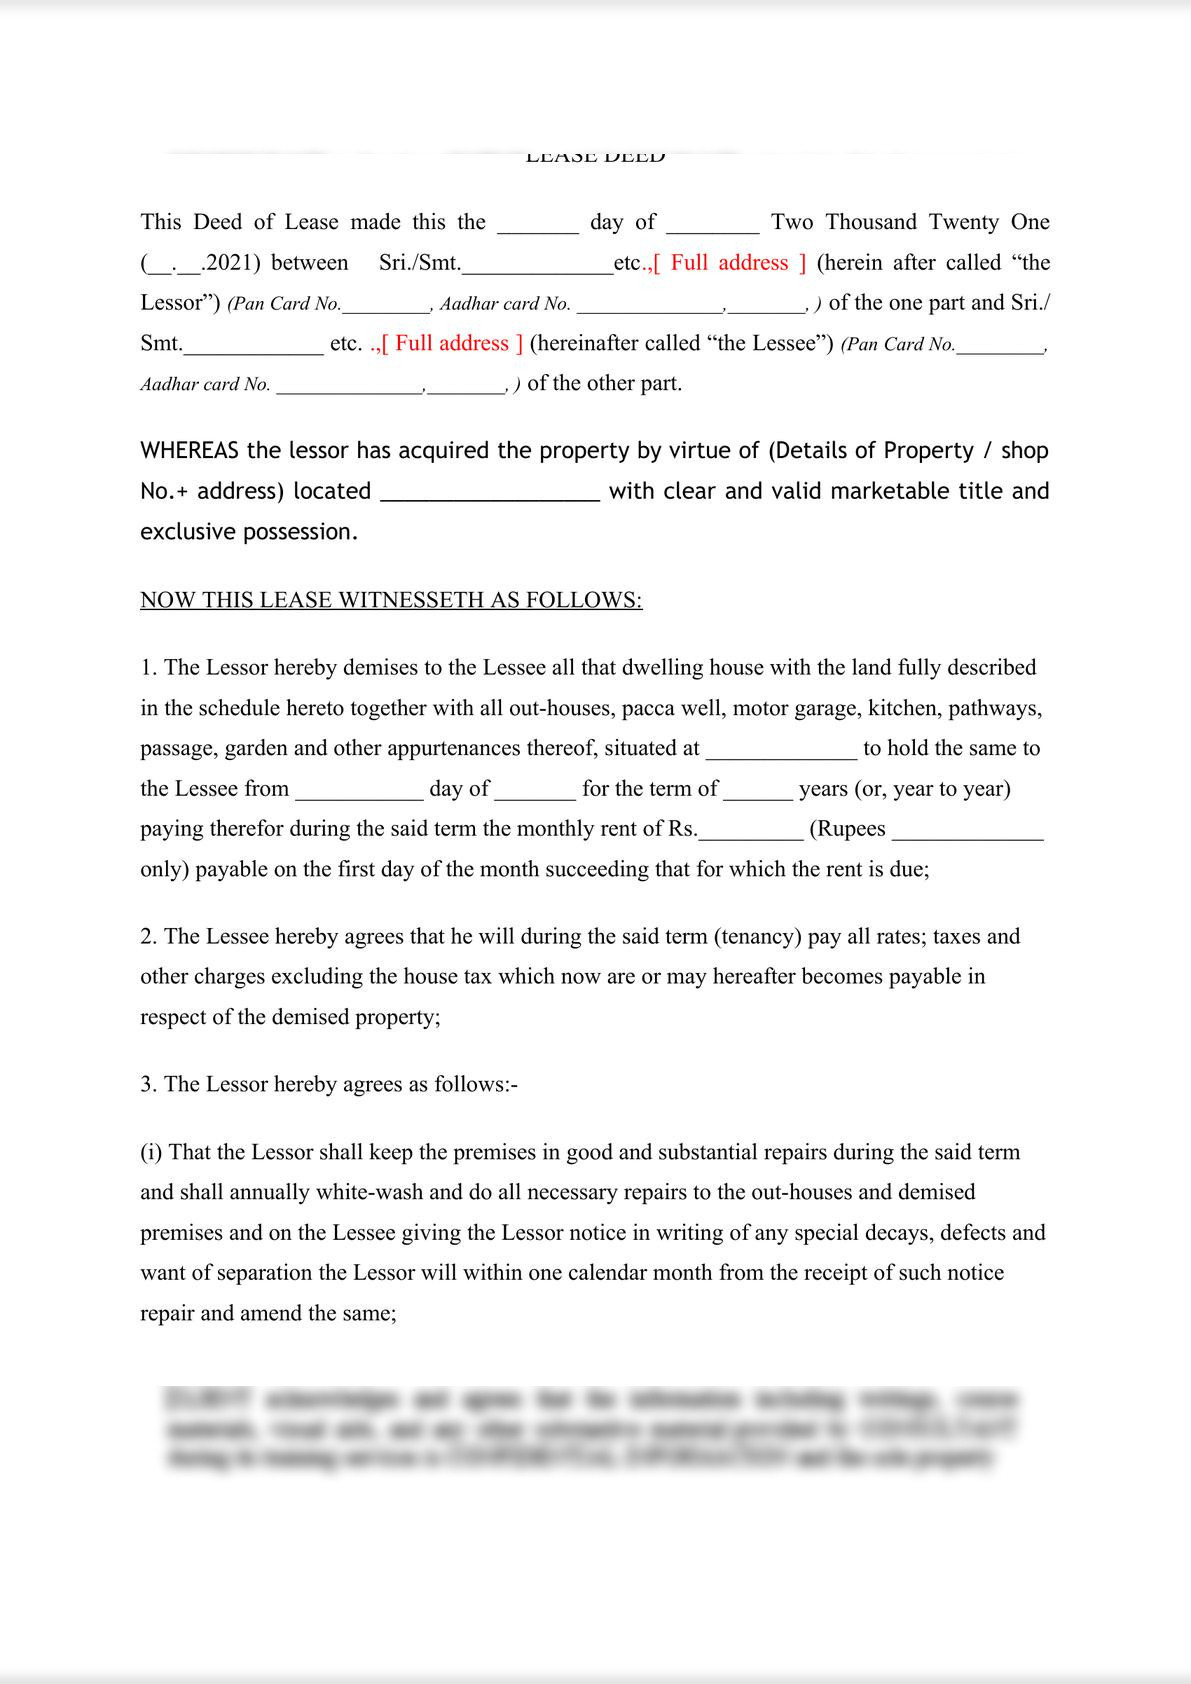 Lease Deed for 11 months - Indian format-0